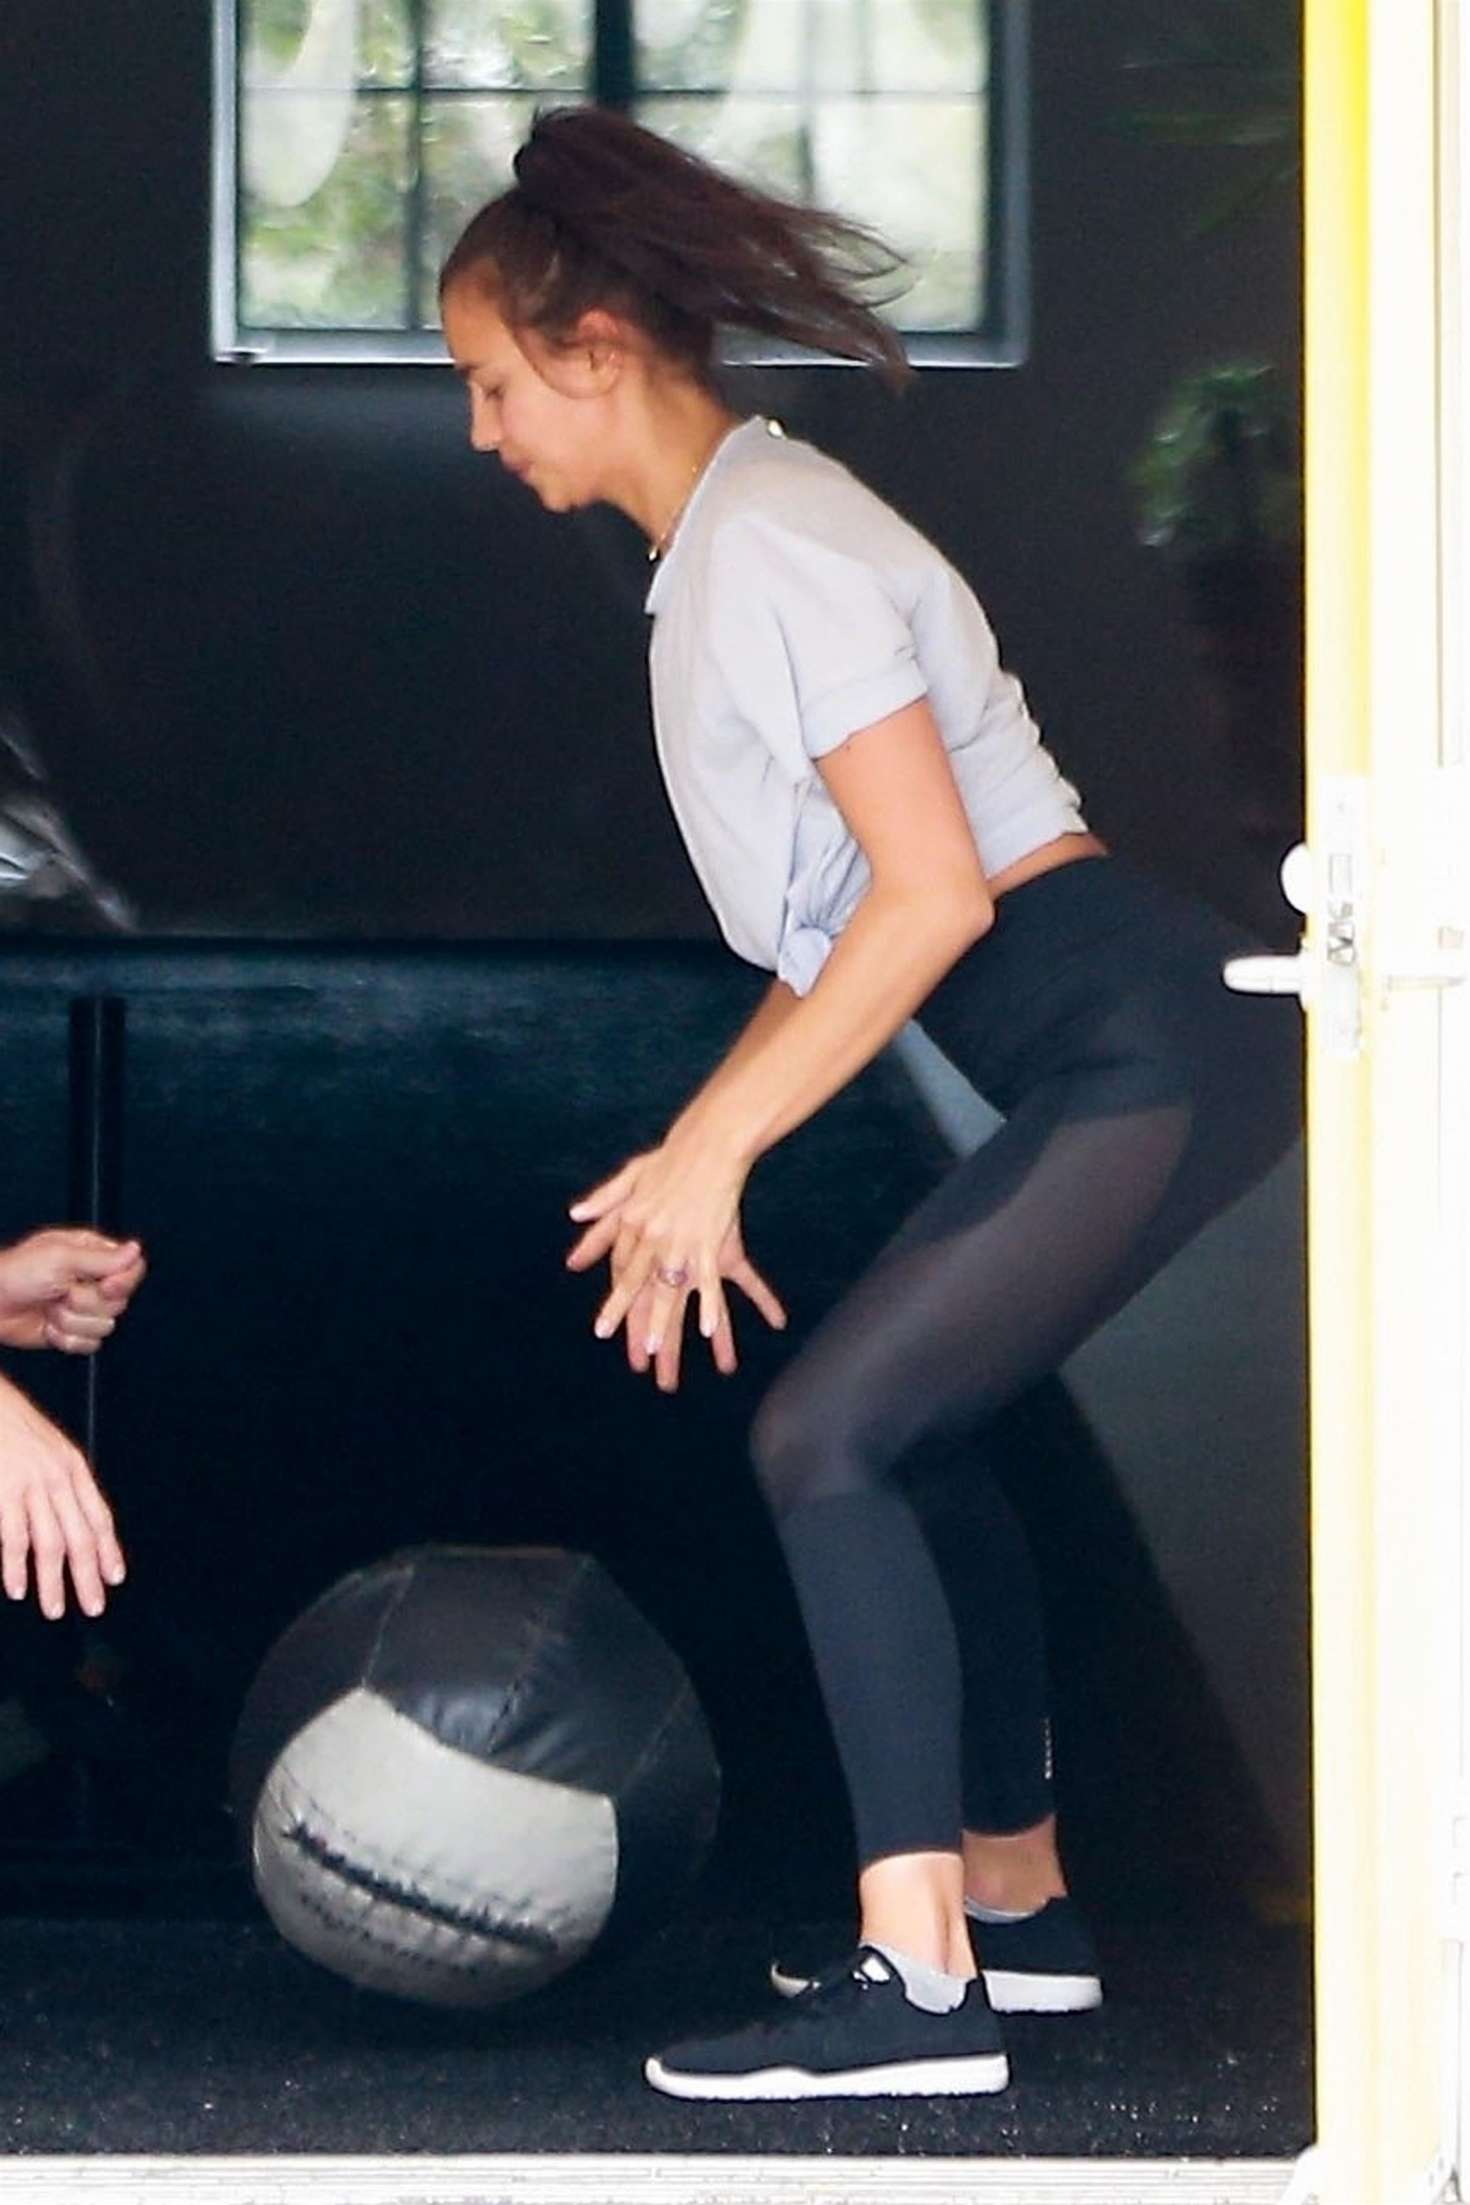 Irina Shayk â€“ Working out with her personal trainer at a gym in LA